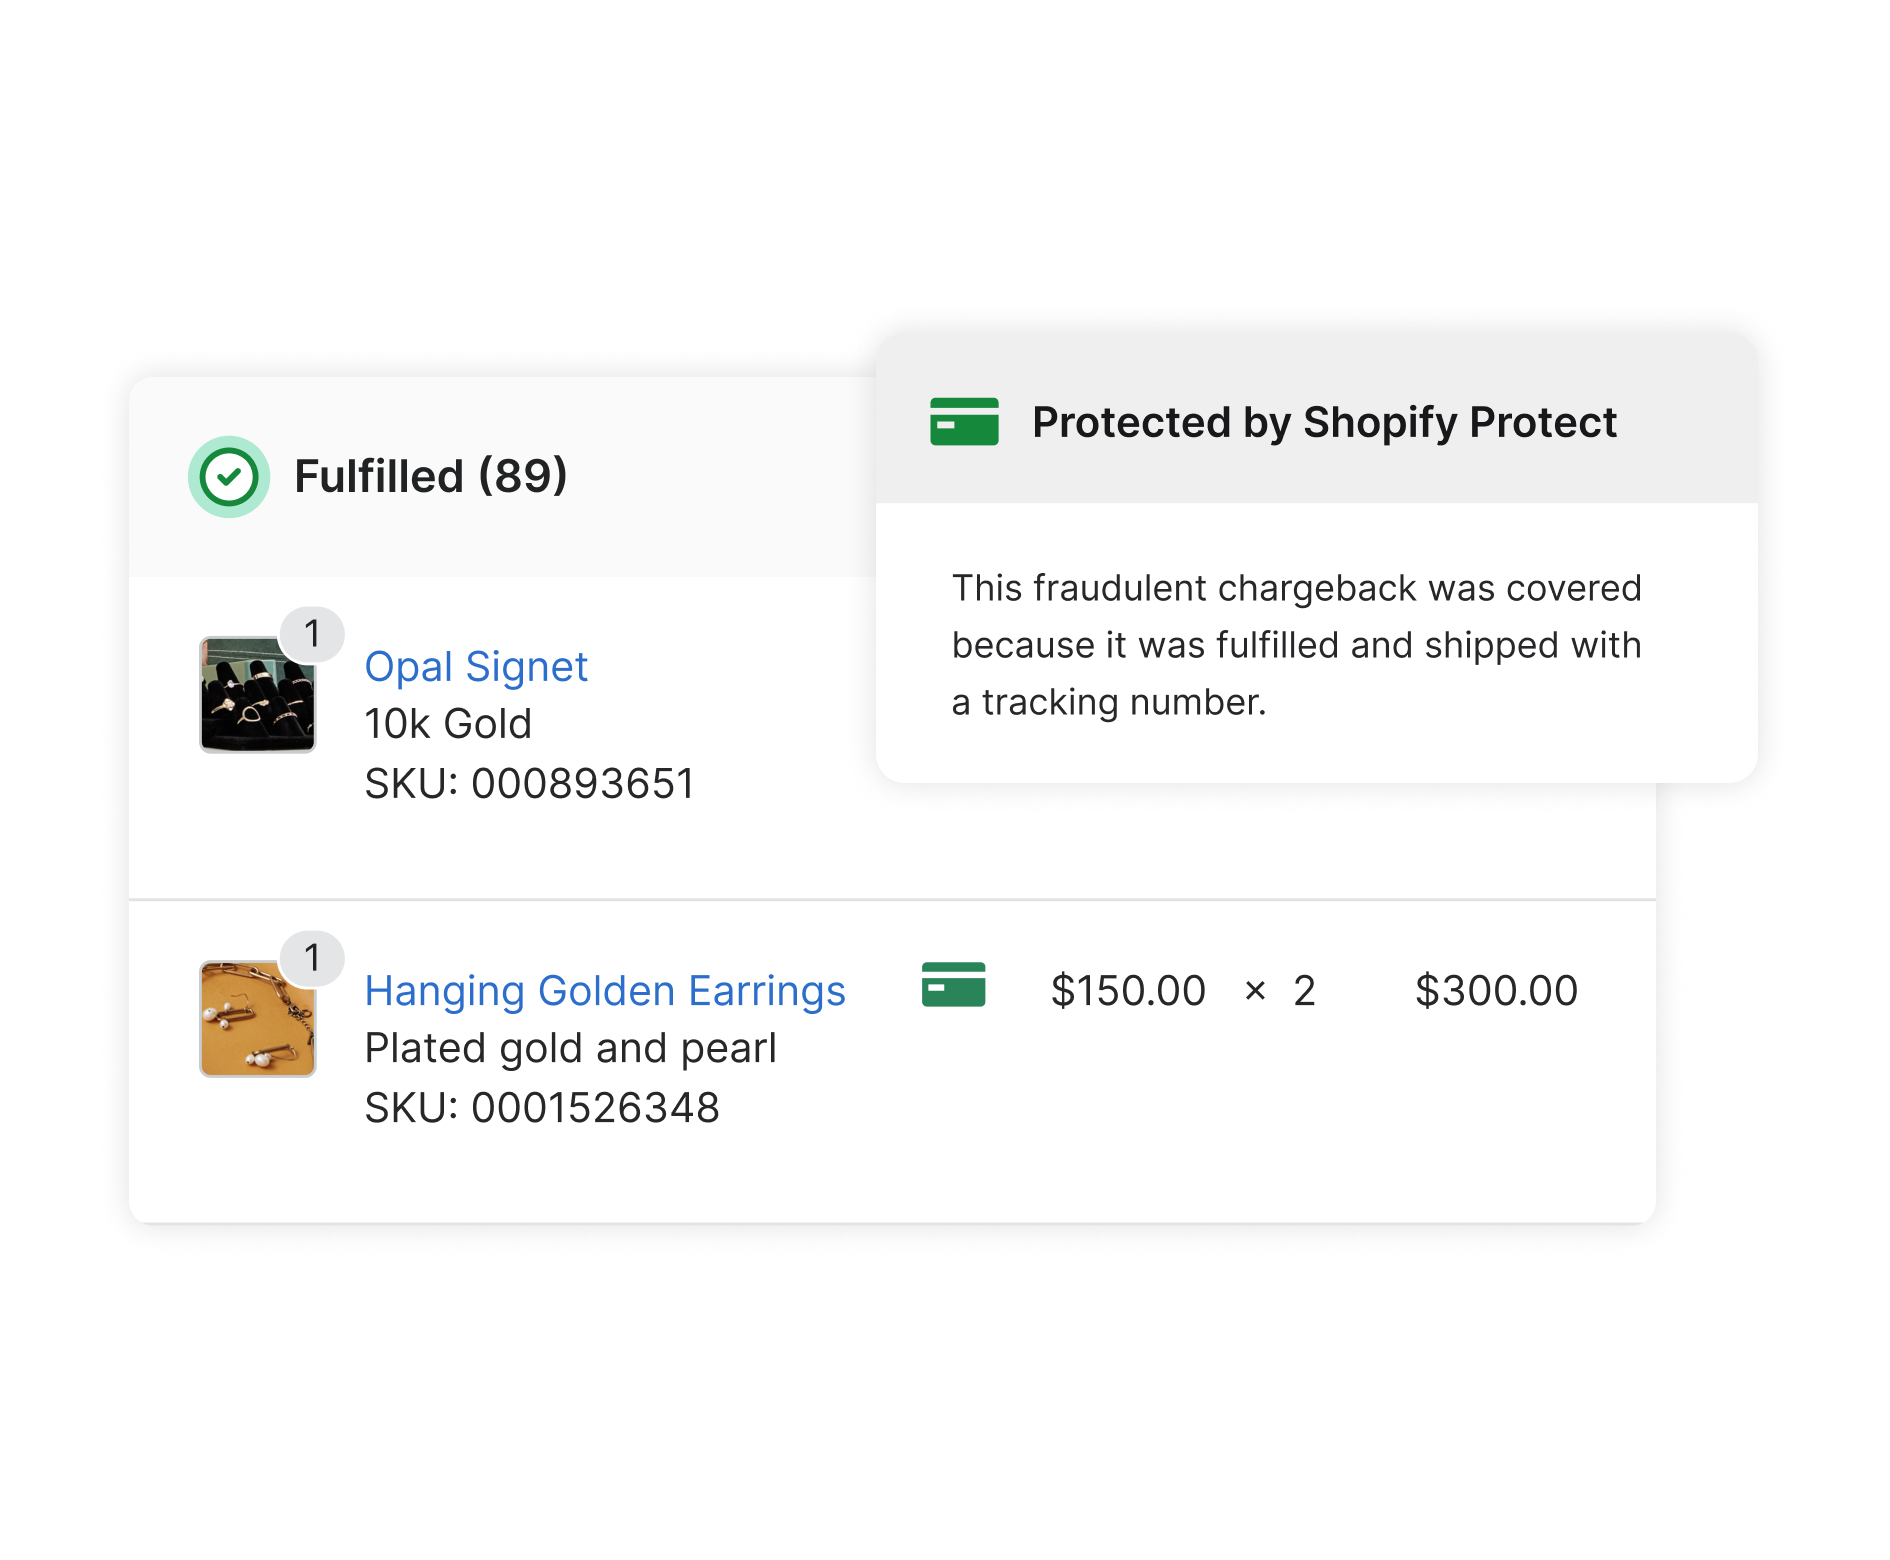 A Shopify merchant’s admin showing fulfilled orders for an opal signet ring and a pair of hanging gold and pearl earrings from their fine jewelry shop. The admin details that these orders are protected by Shopify Protect, full fraudulent chargeback protection.